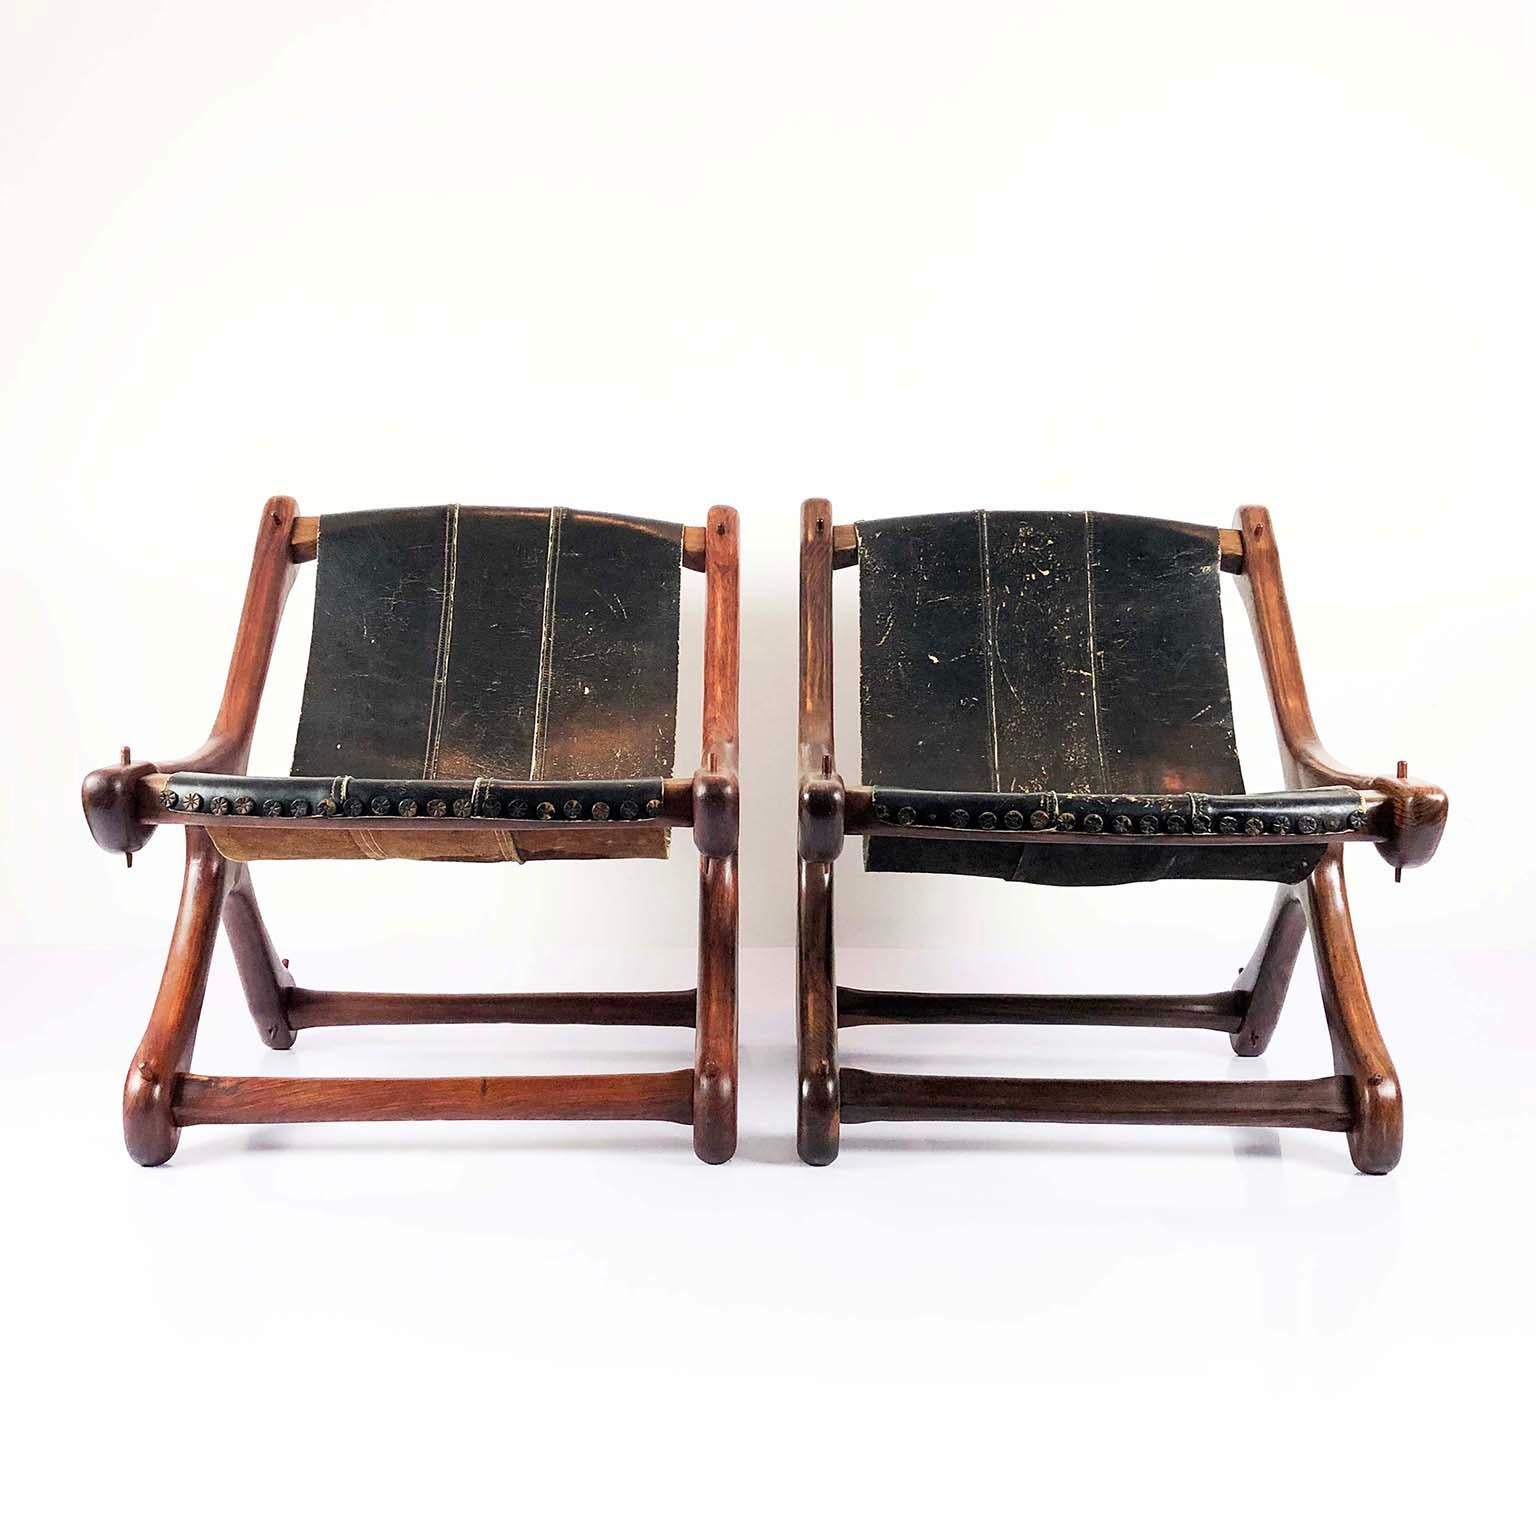 Pair of original vintage sling chairs designed and produced by Don Shoemaker for Señal S.A, solid Cocobolo with original black leather sling seat, circa 1960.